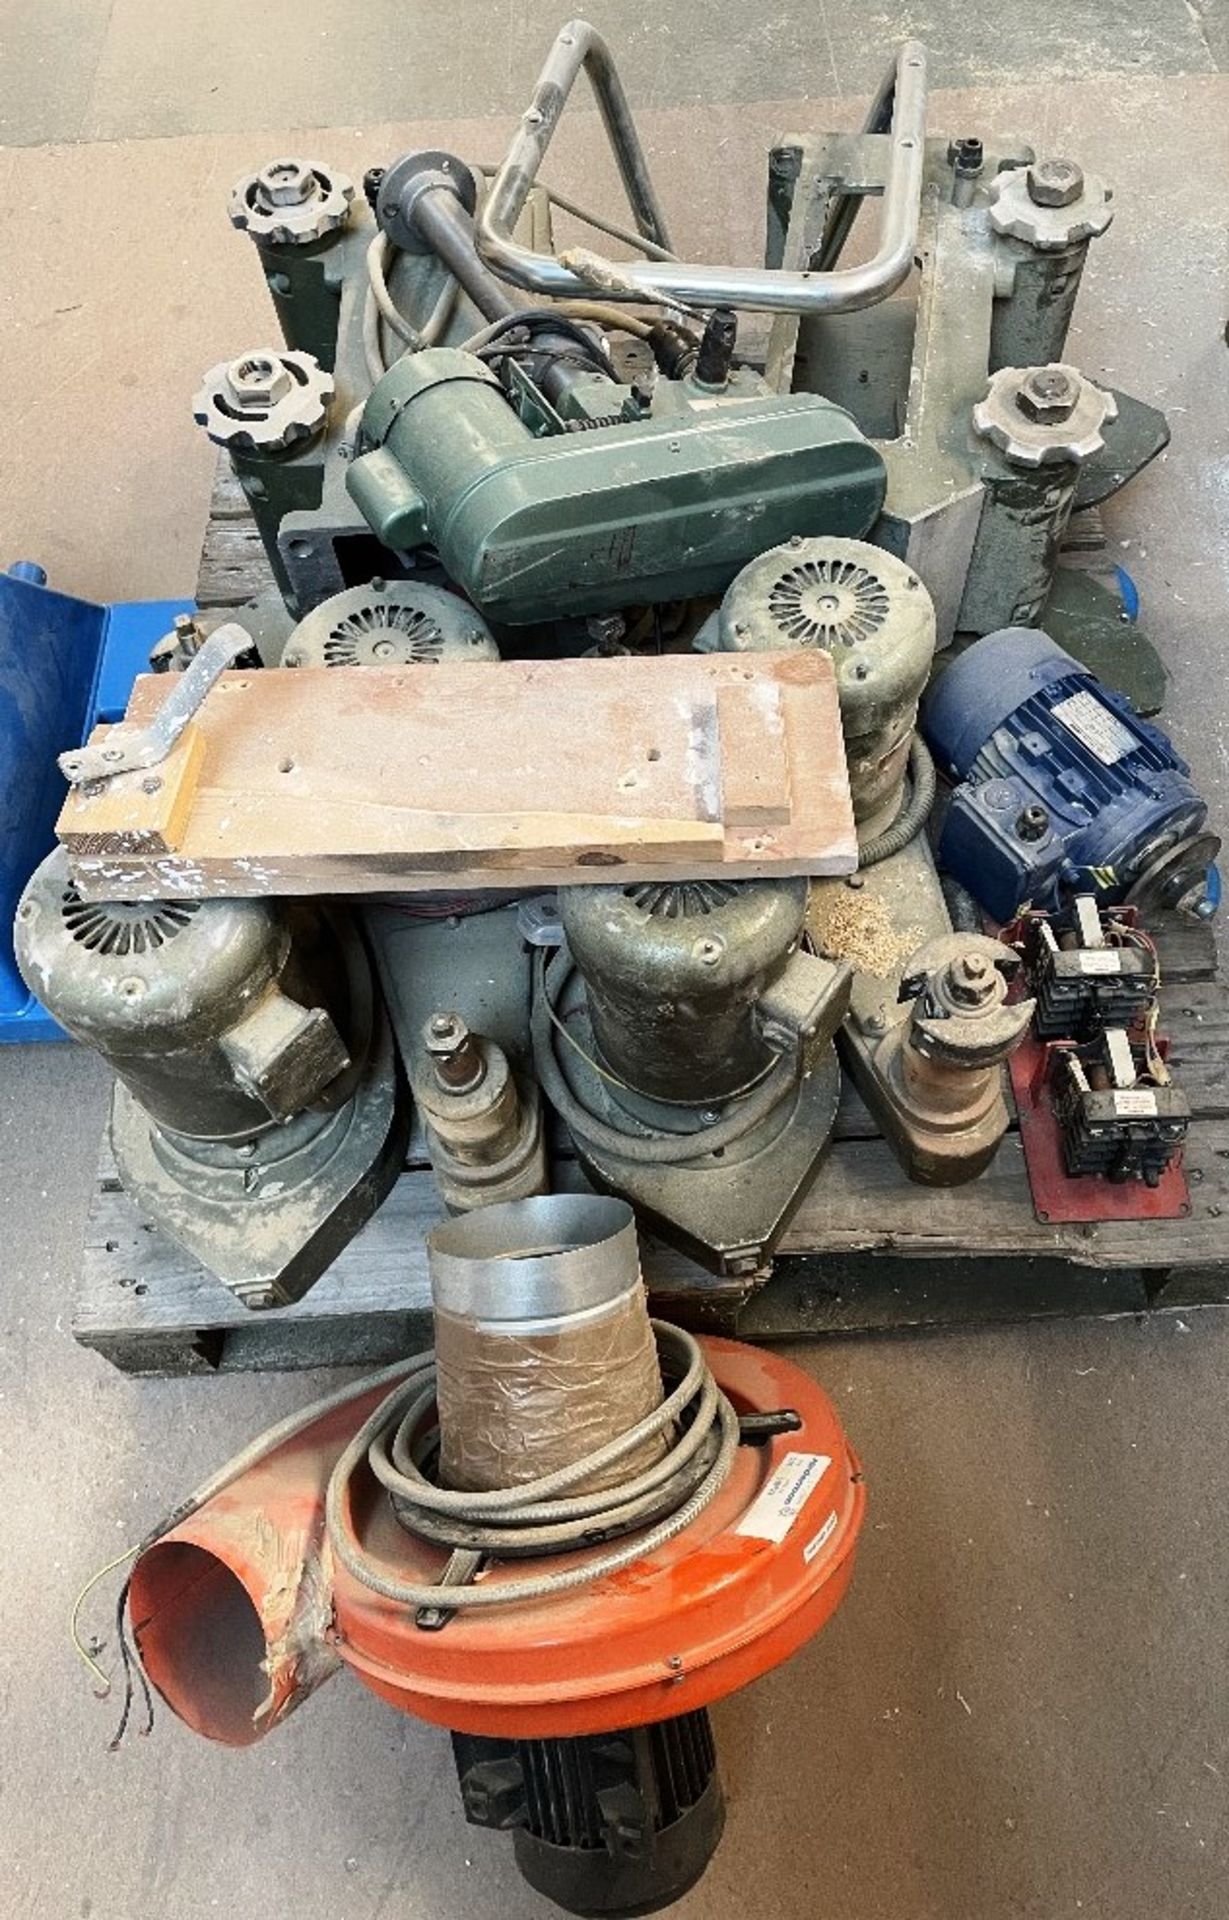 Pallet of Machine Parts & Motors - As Pictured